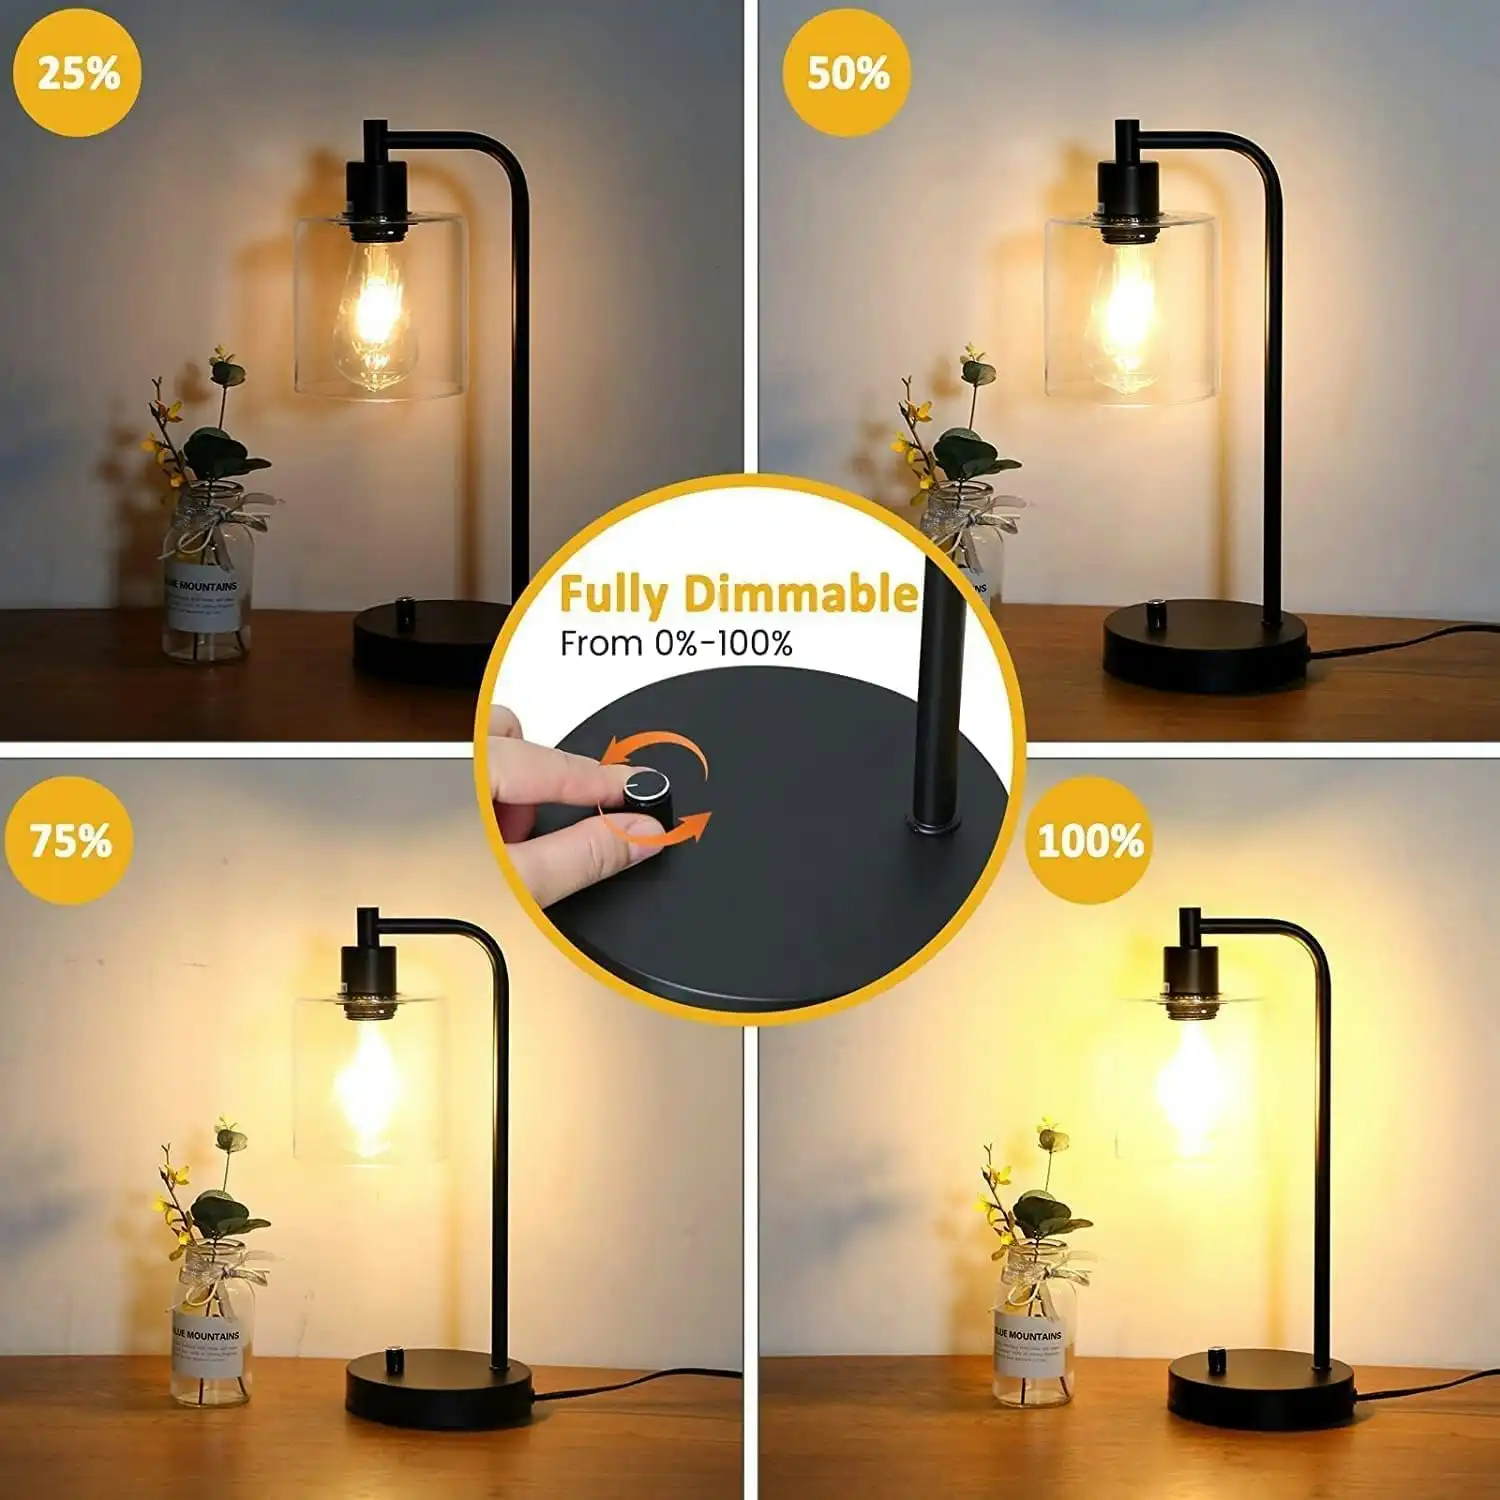 Industrial Desk Lamp USB Charging Port Modern Dimmable Bedside Nightstand Lamp Glass Shade Bedroom Living Room Office Bulb Included Black